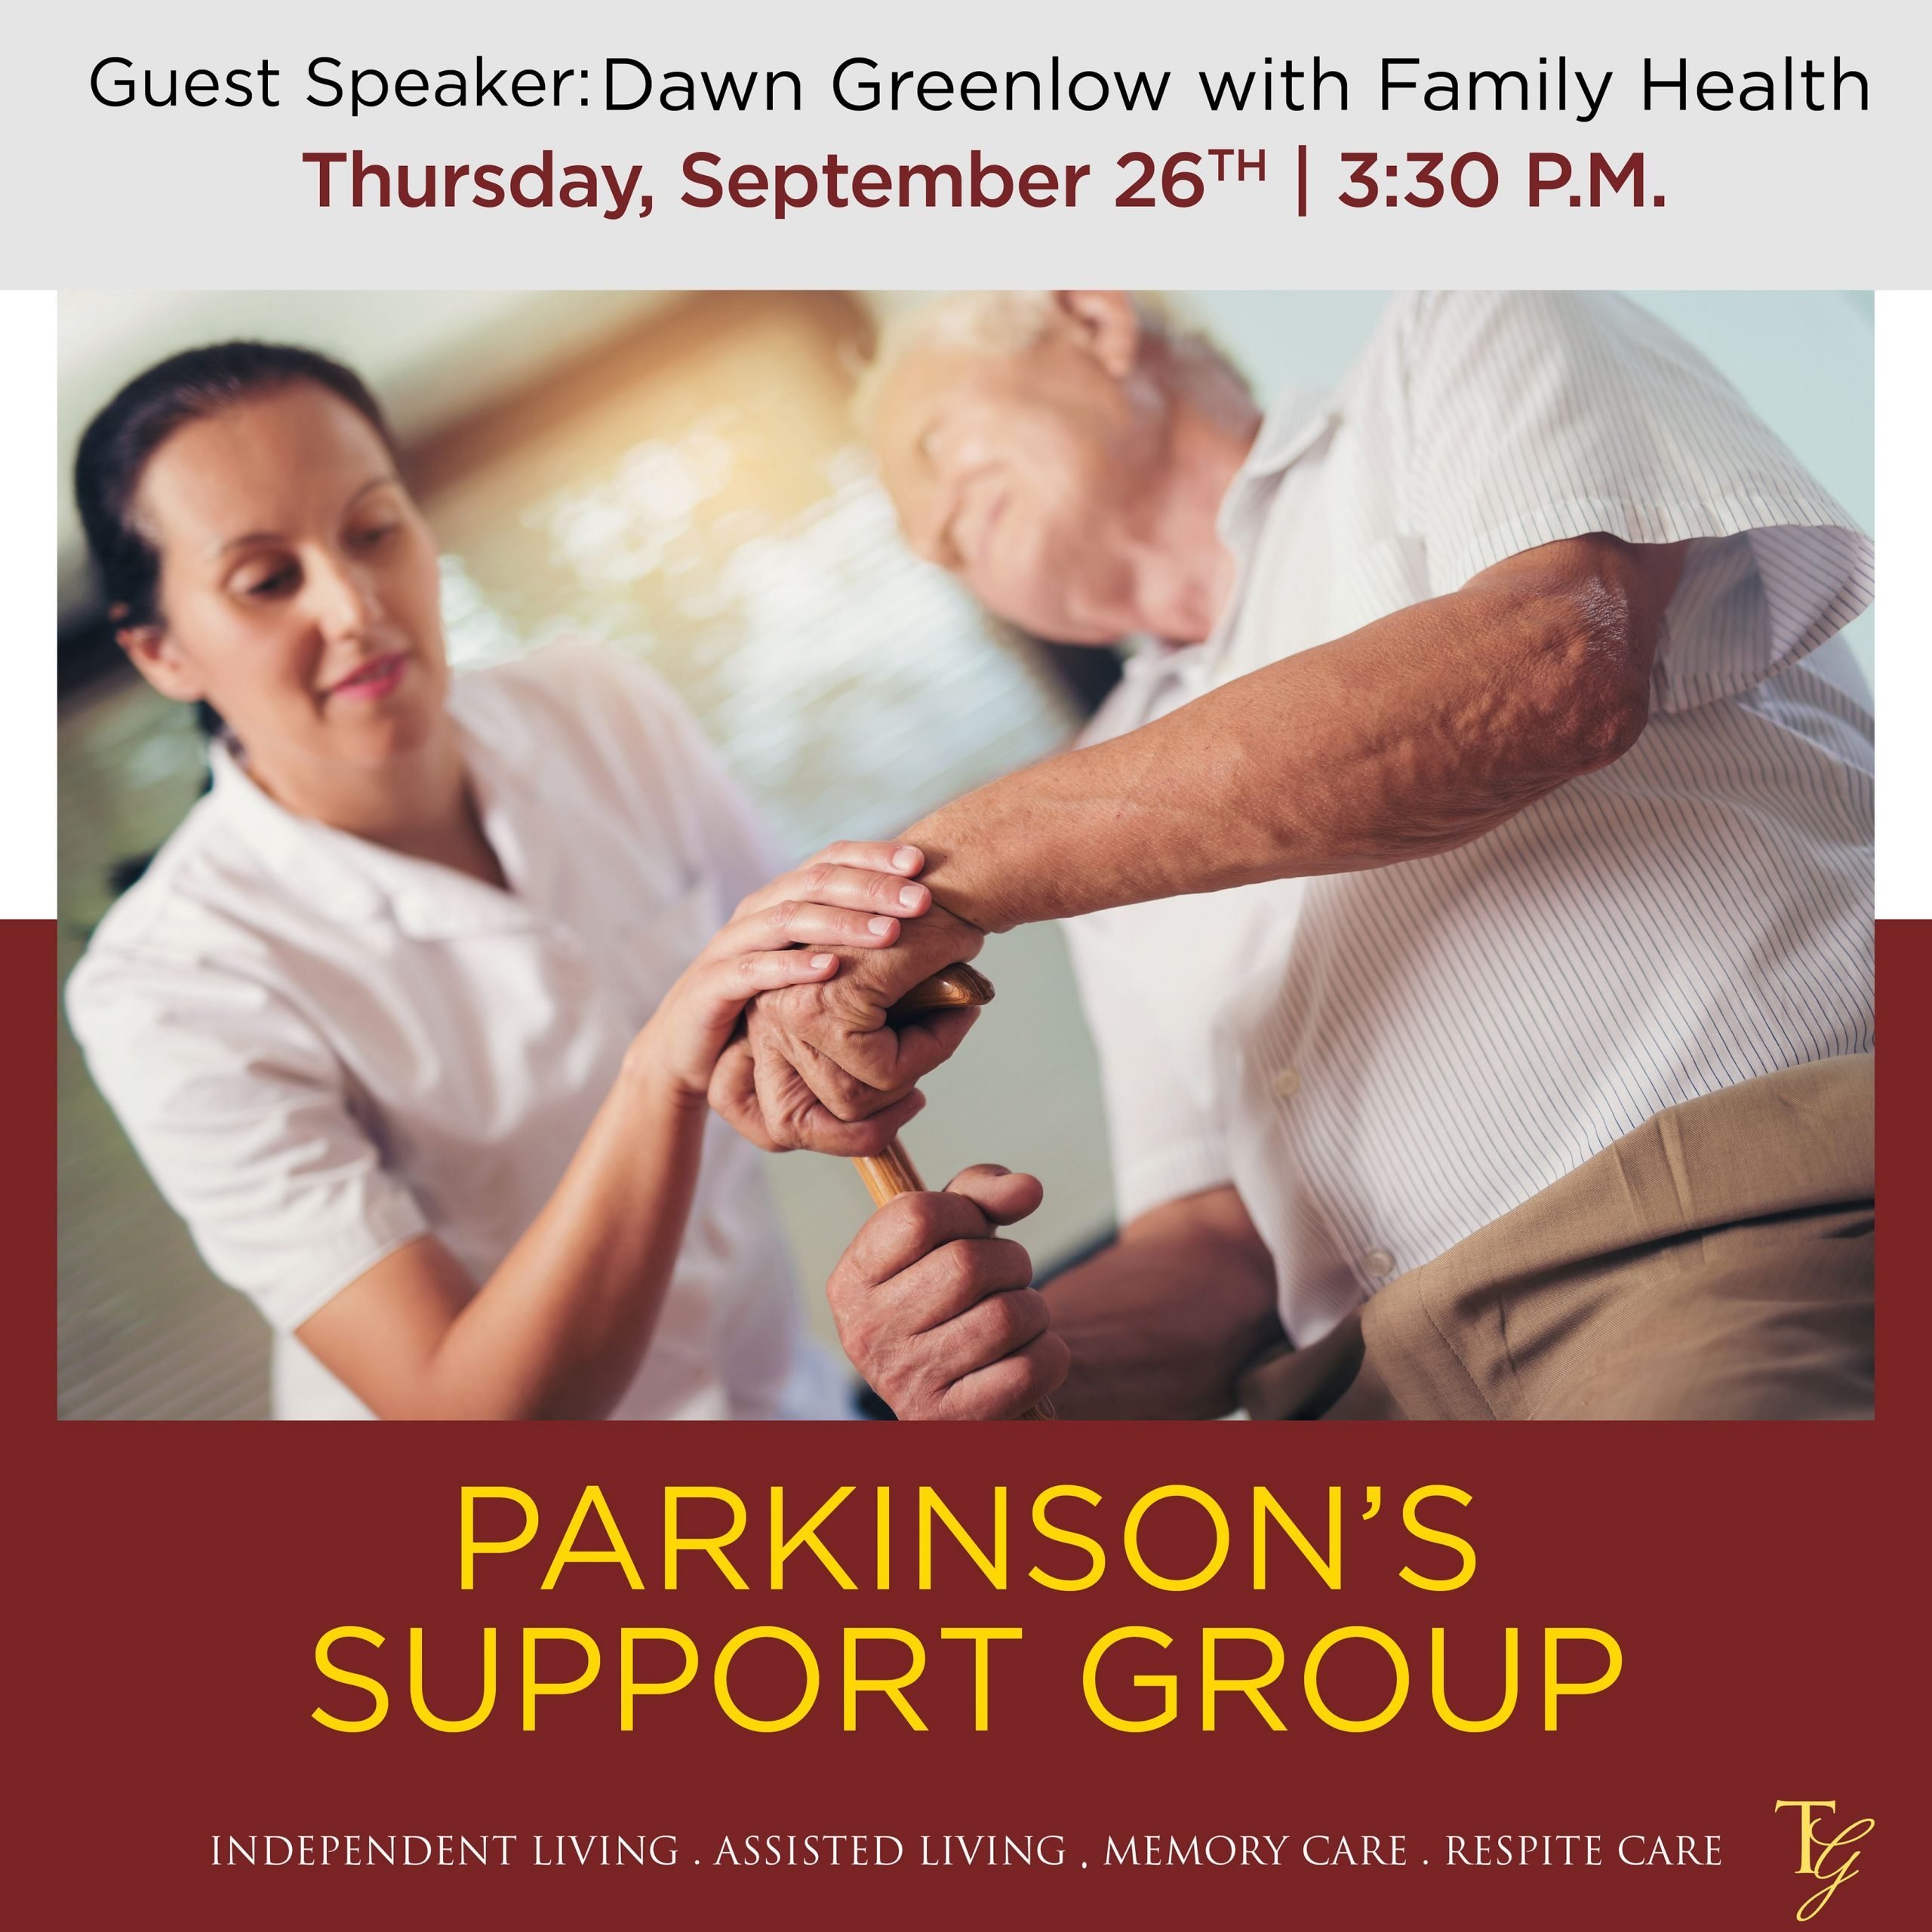 Caring for a loved one with Parkinsonâs disease may be a ...